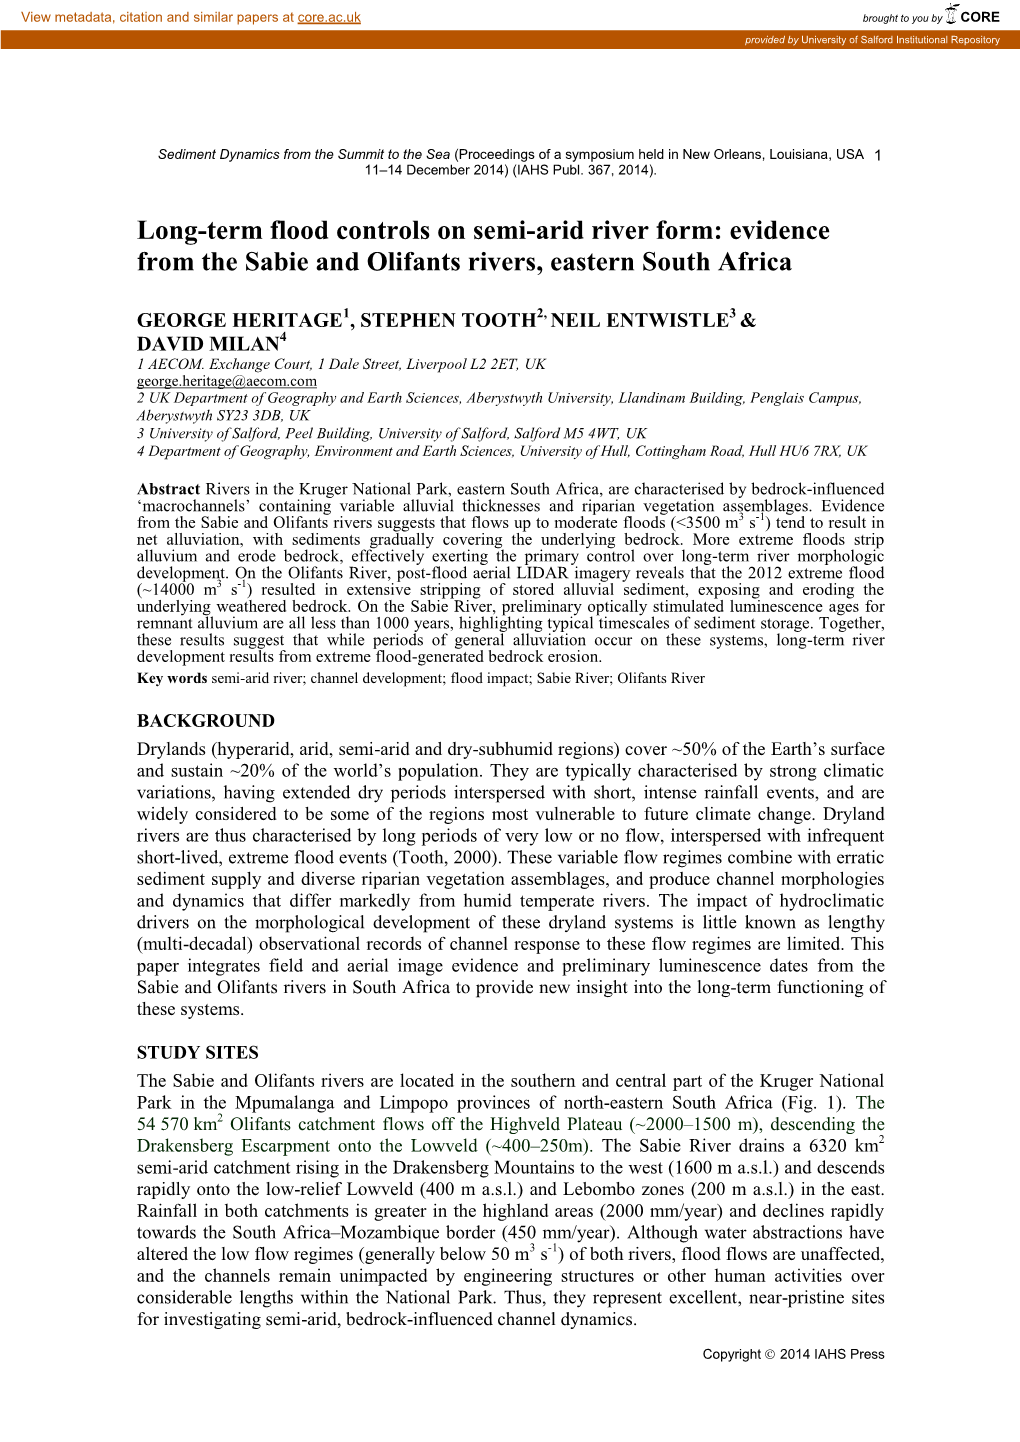 Evidence from the Sabie and Olifants Rivers, Eastern South Africa